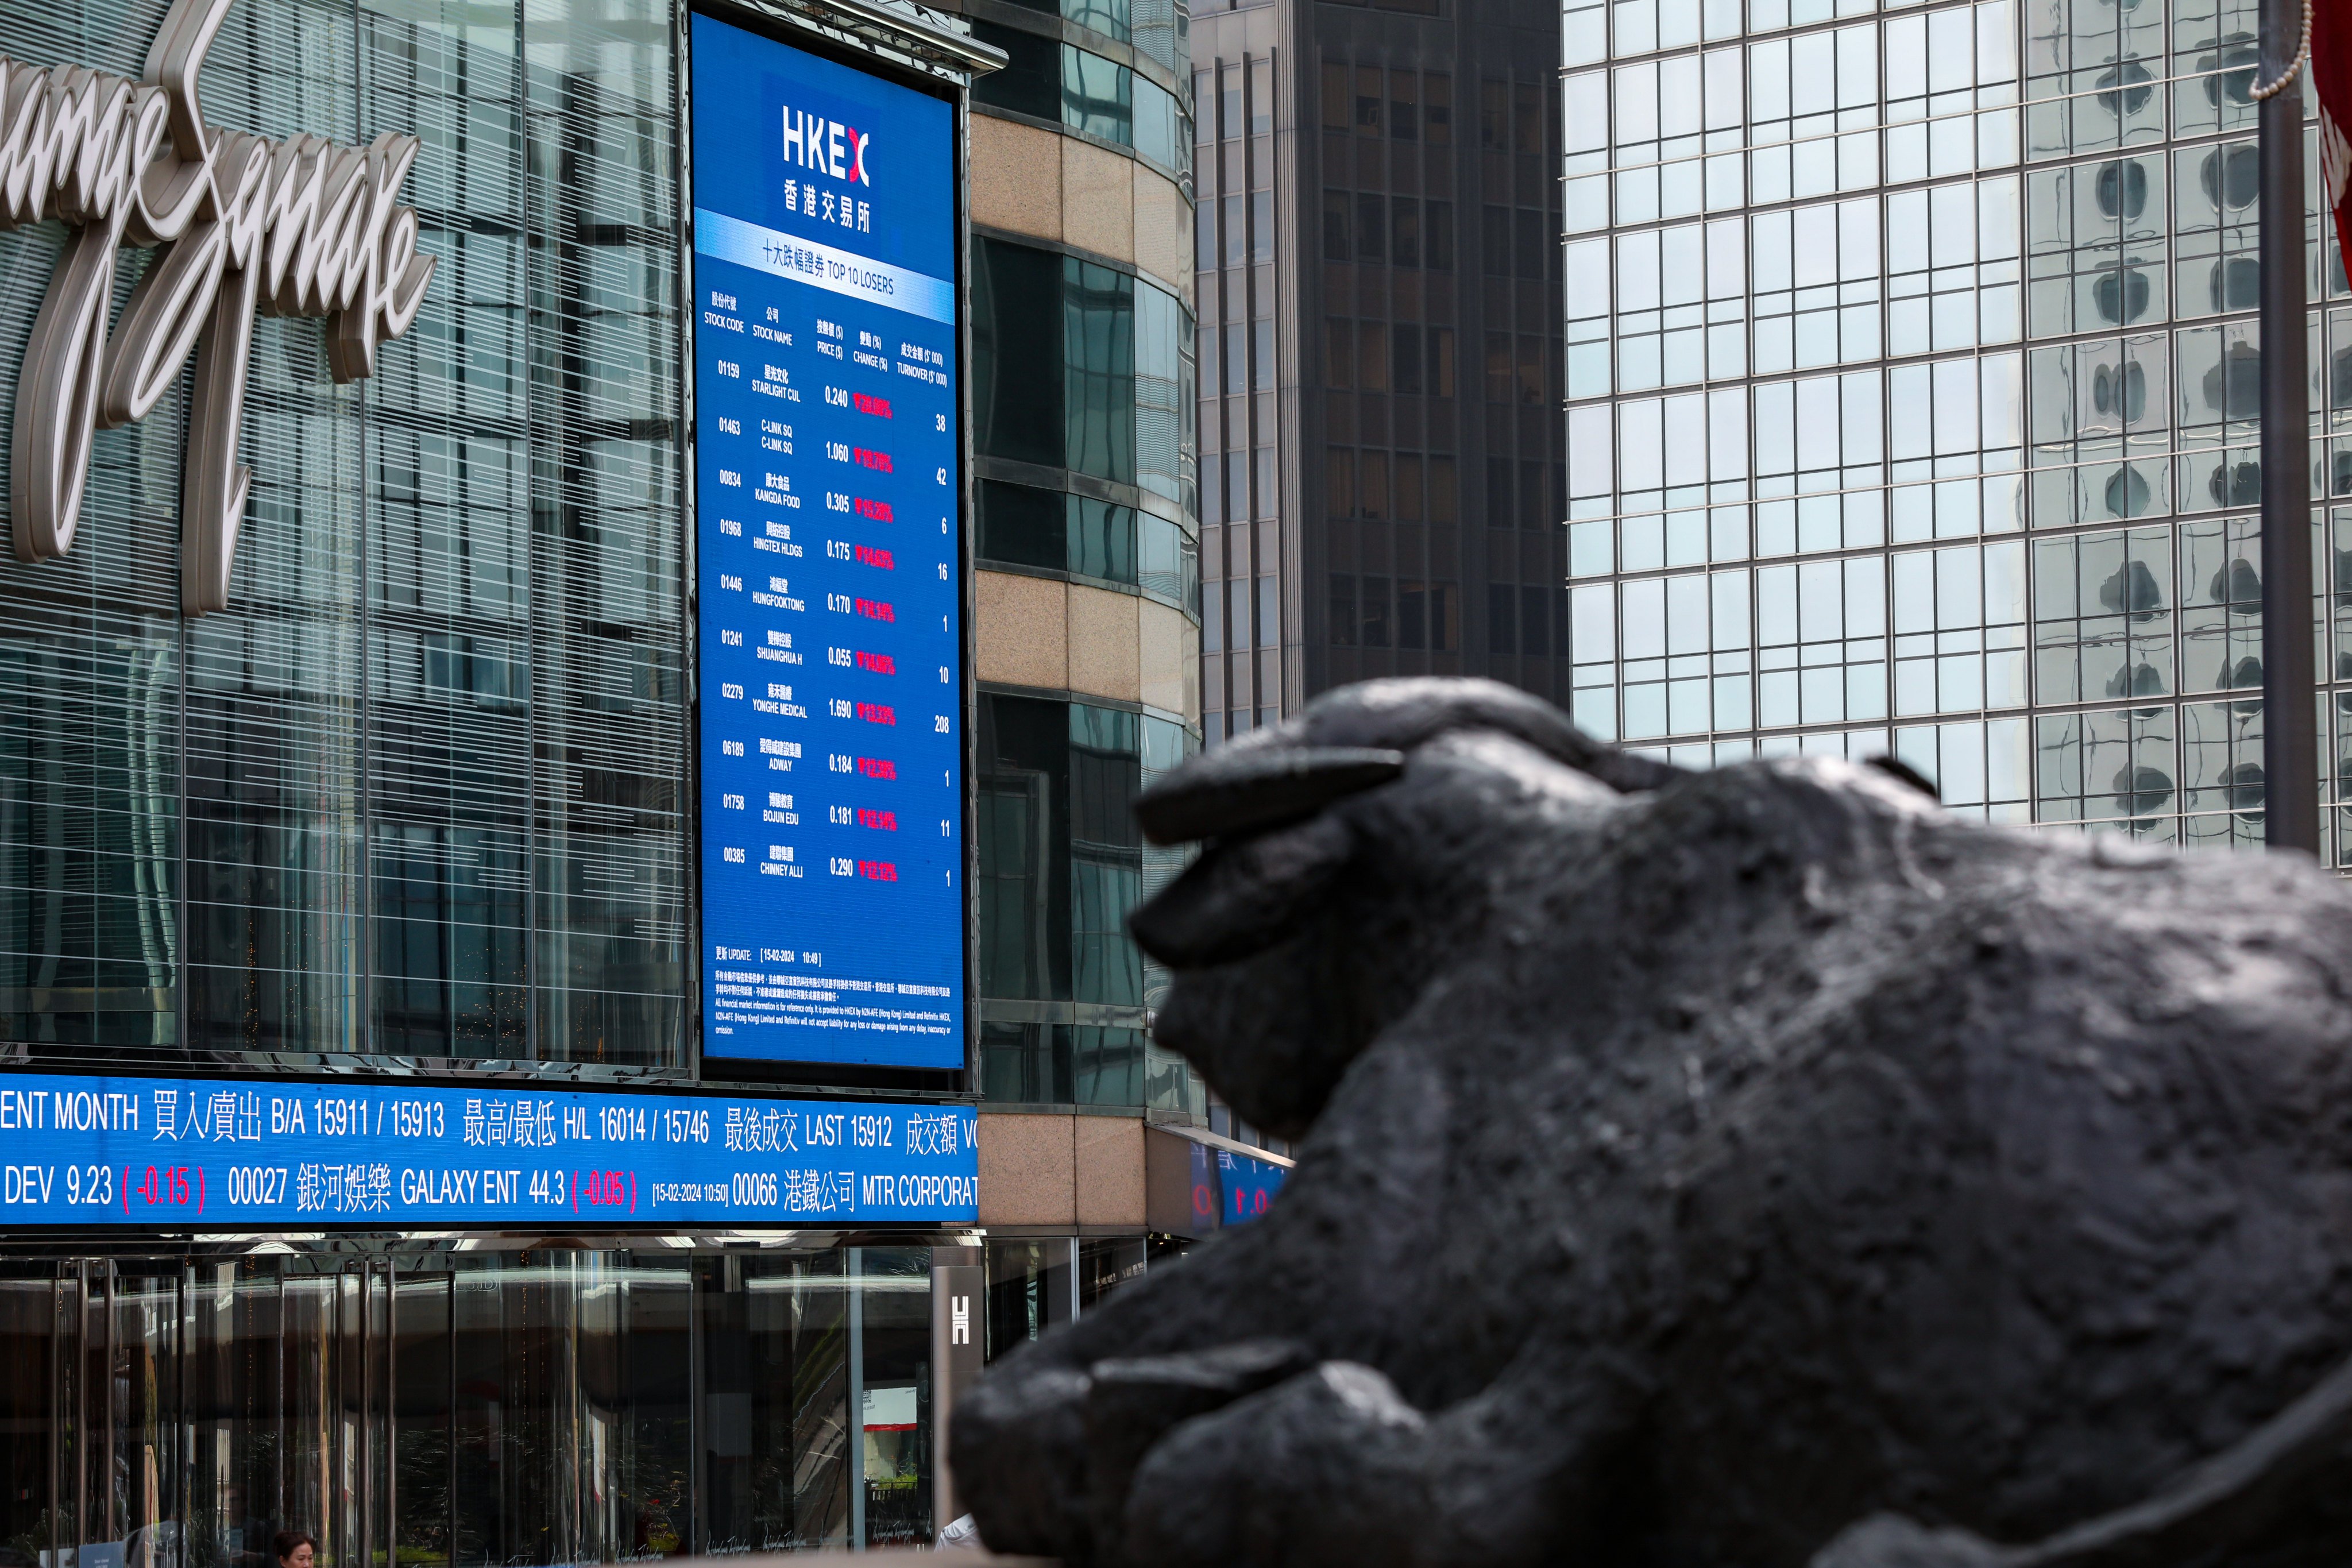 Screens showing the index and stock prices outside Hong Kong Exchange Square (HKEX) in Central. Photo: Sun Yeung